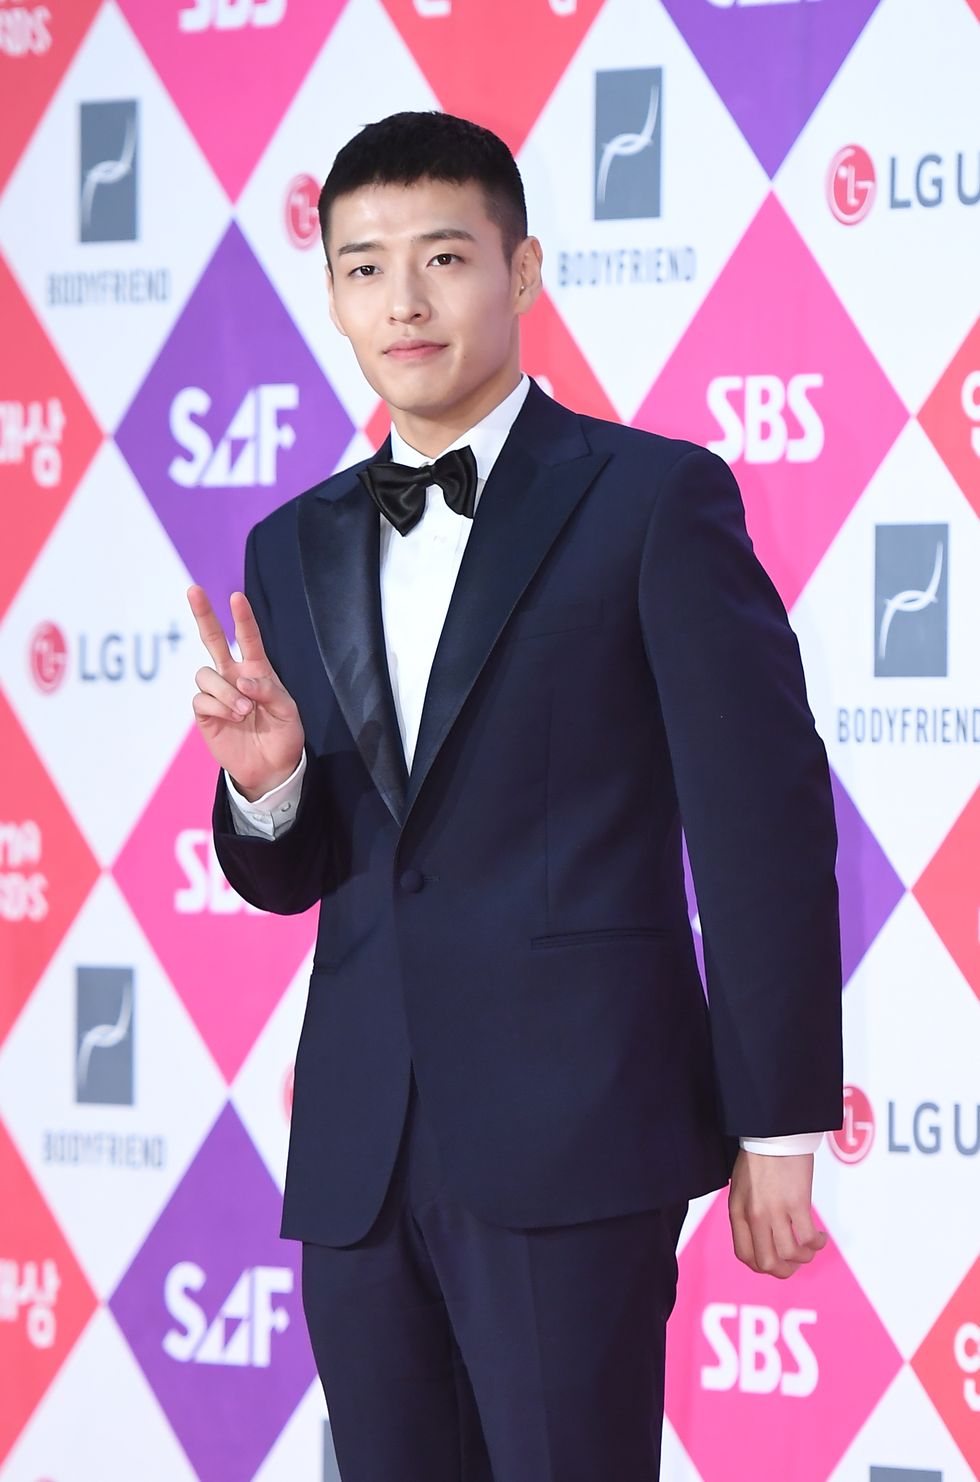 actor kang ha neul attends the 2016 sbs drama awards at sangam sbs on december 31th in seoul, south korea photoosen